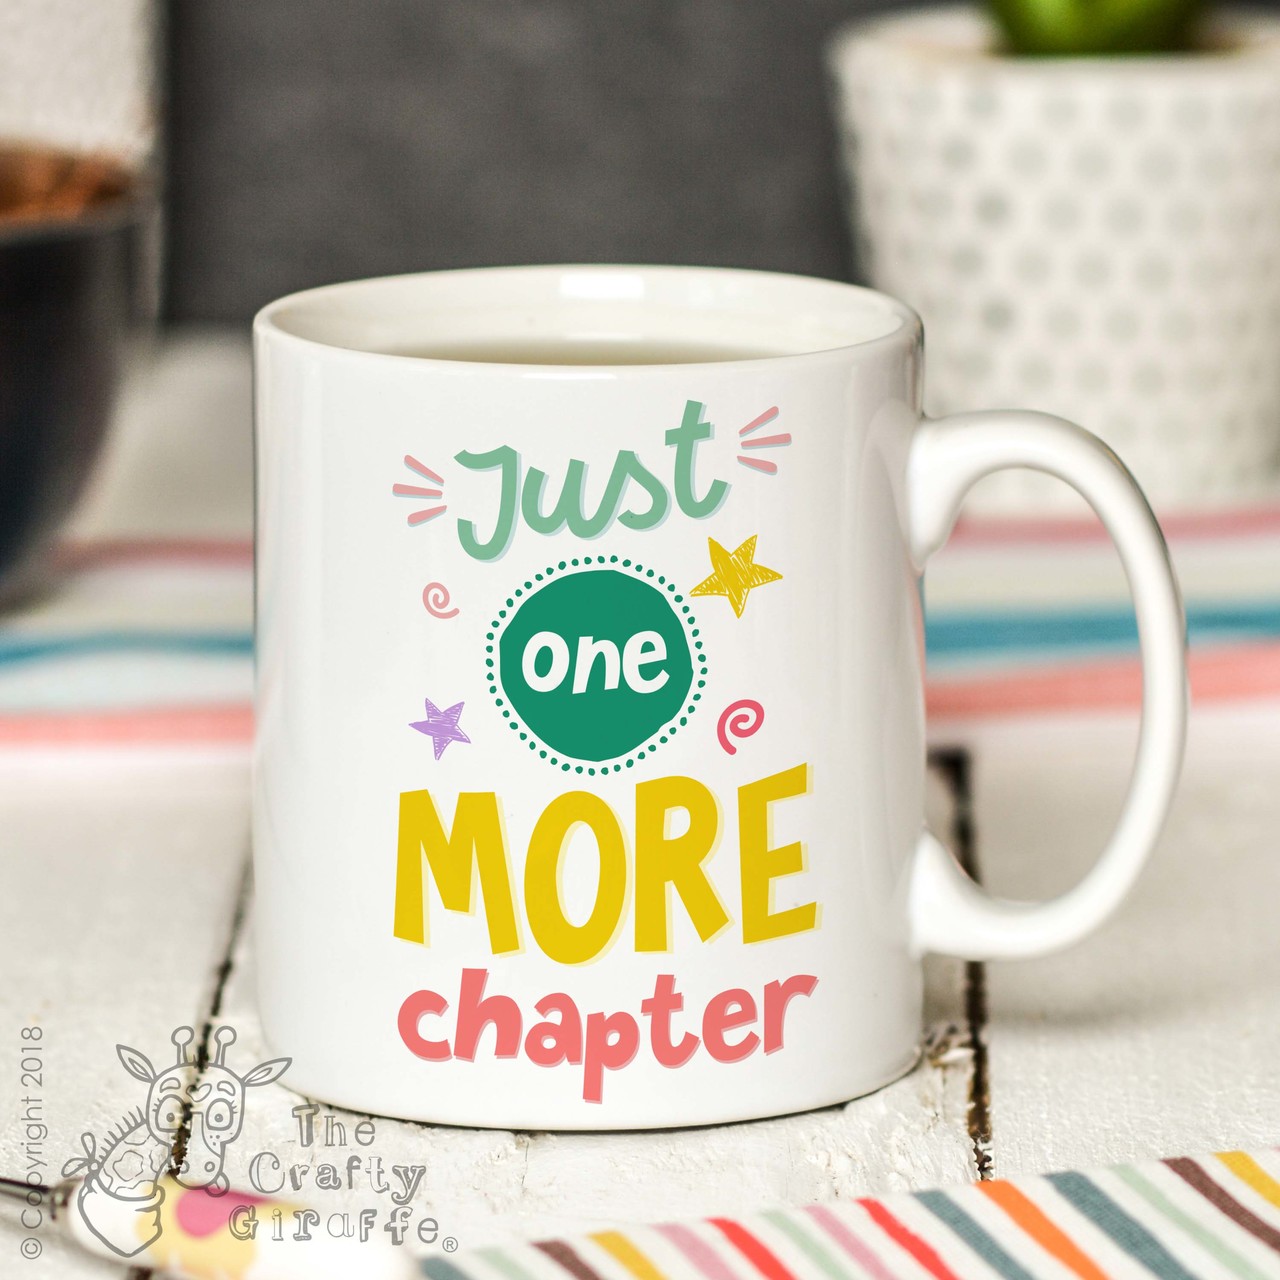 Just one more chapter Mug